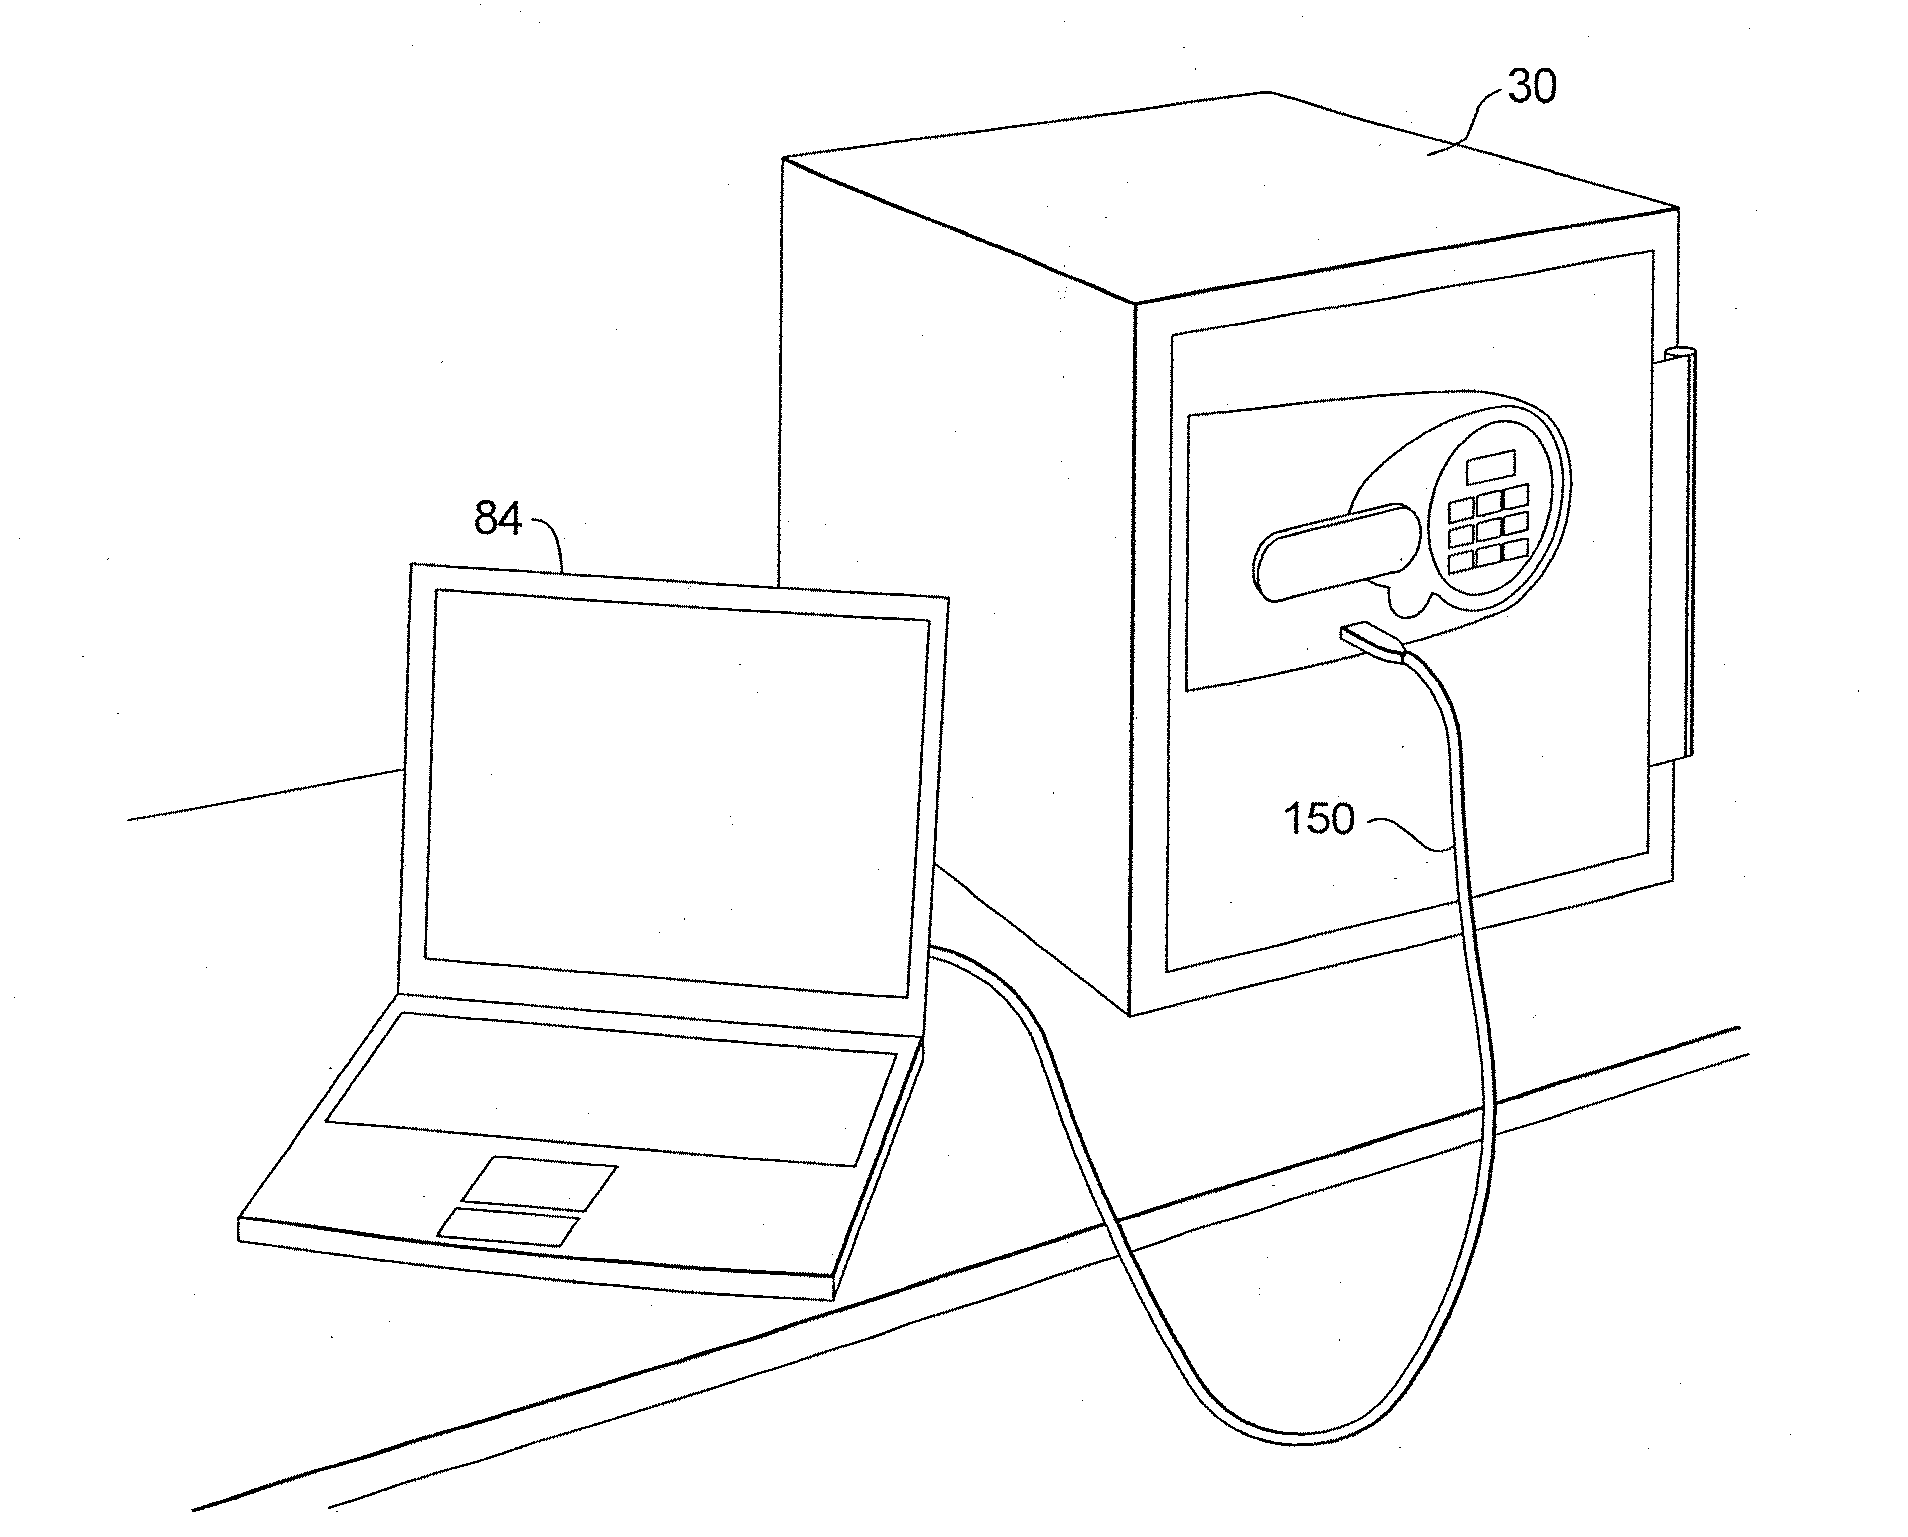 Safe with controllable data transfer capability